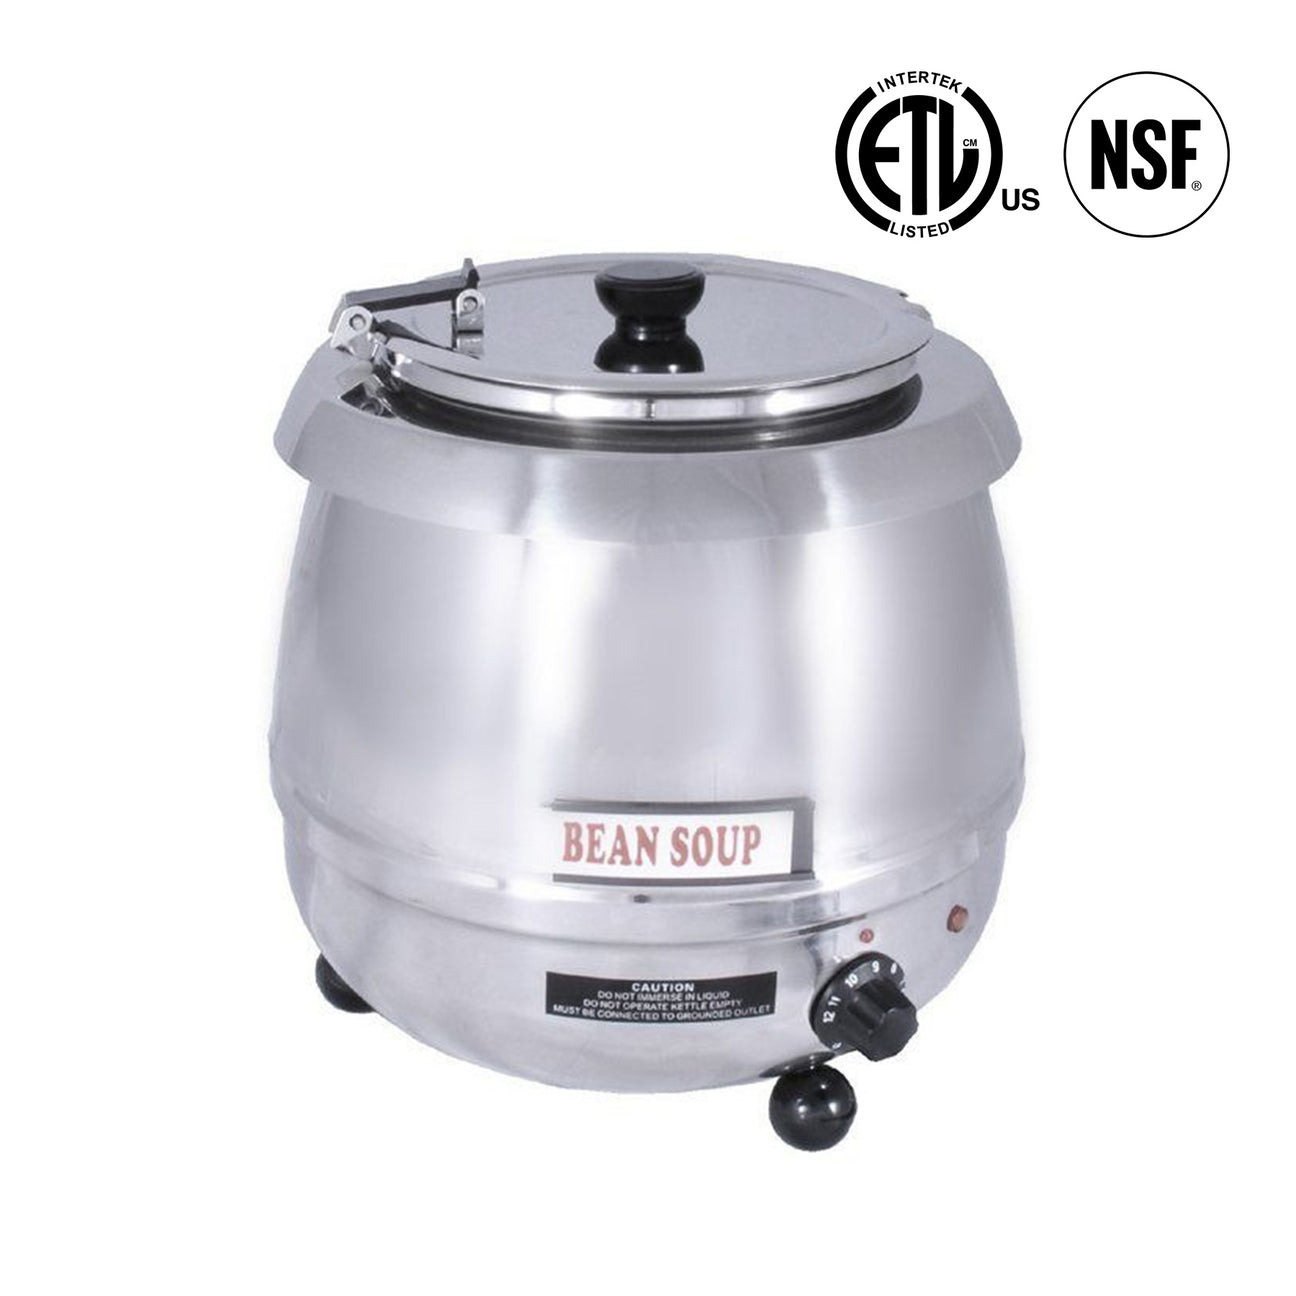 Electrical Soup Kettle